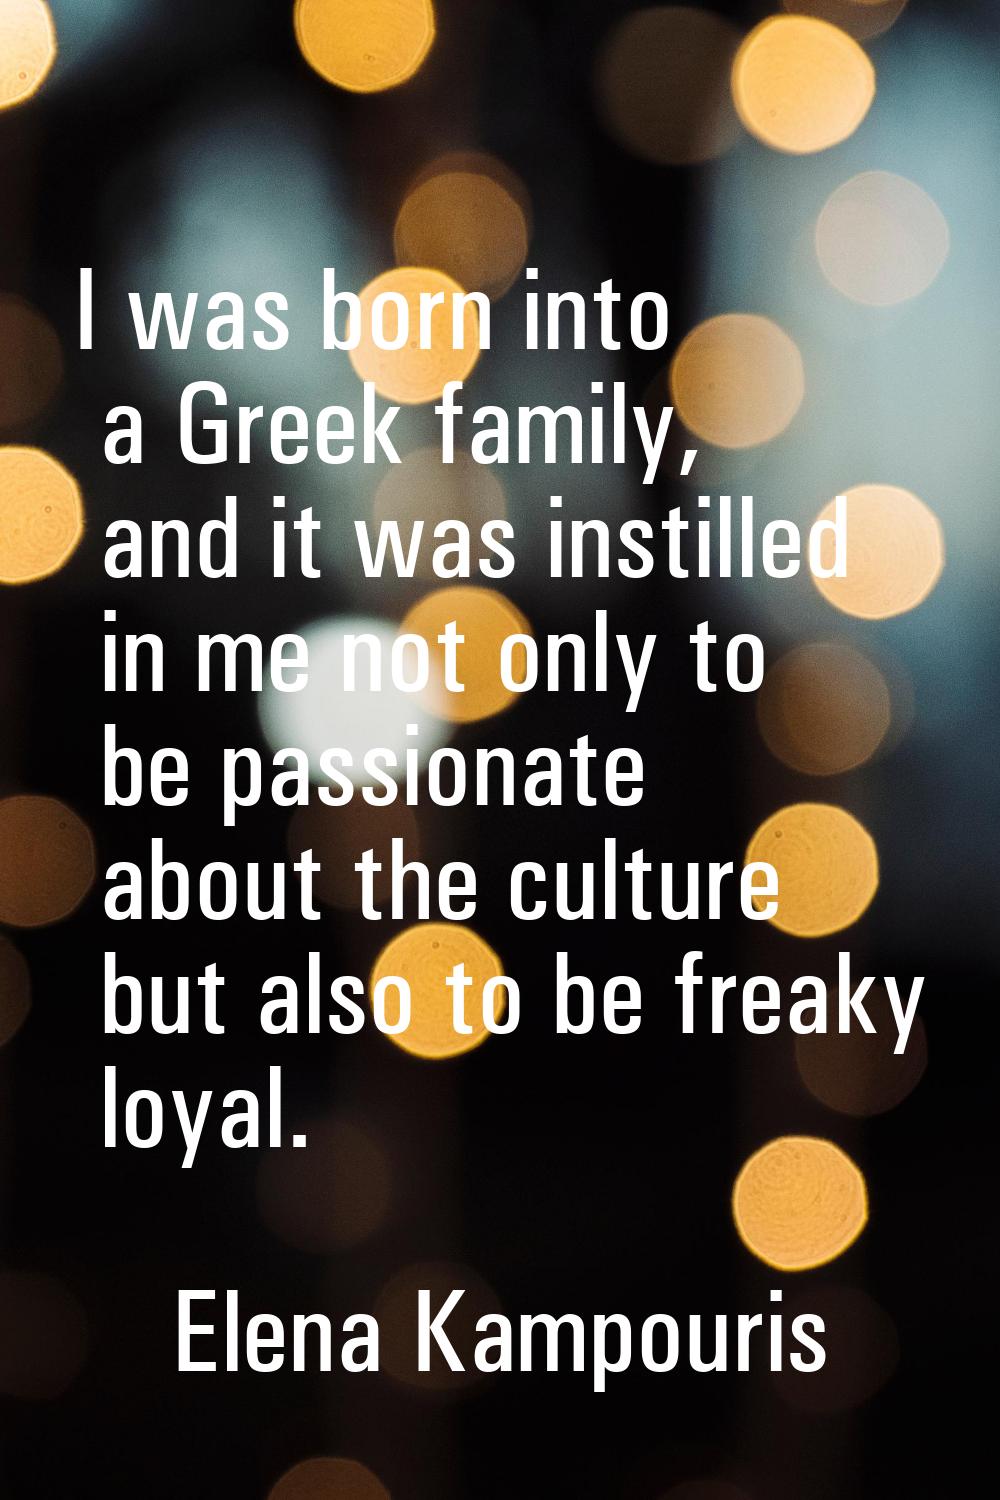 I was born into a Greek family, and it was instilled in me not only to be passionate about the cult